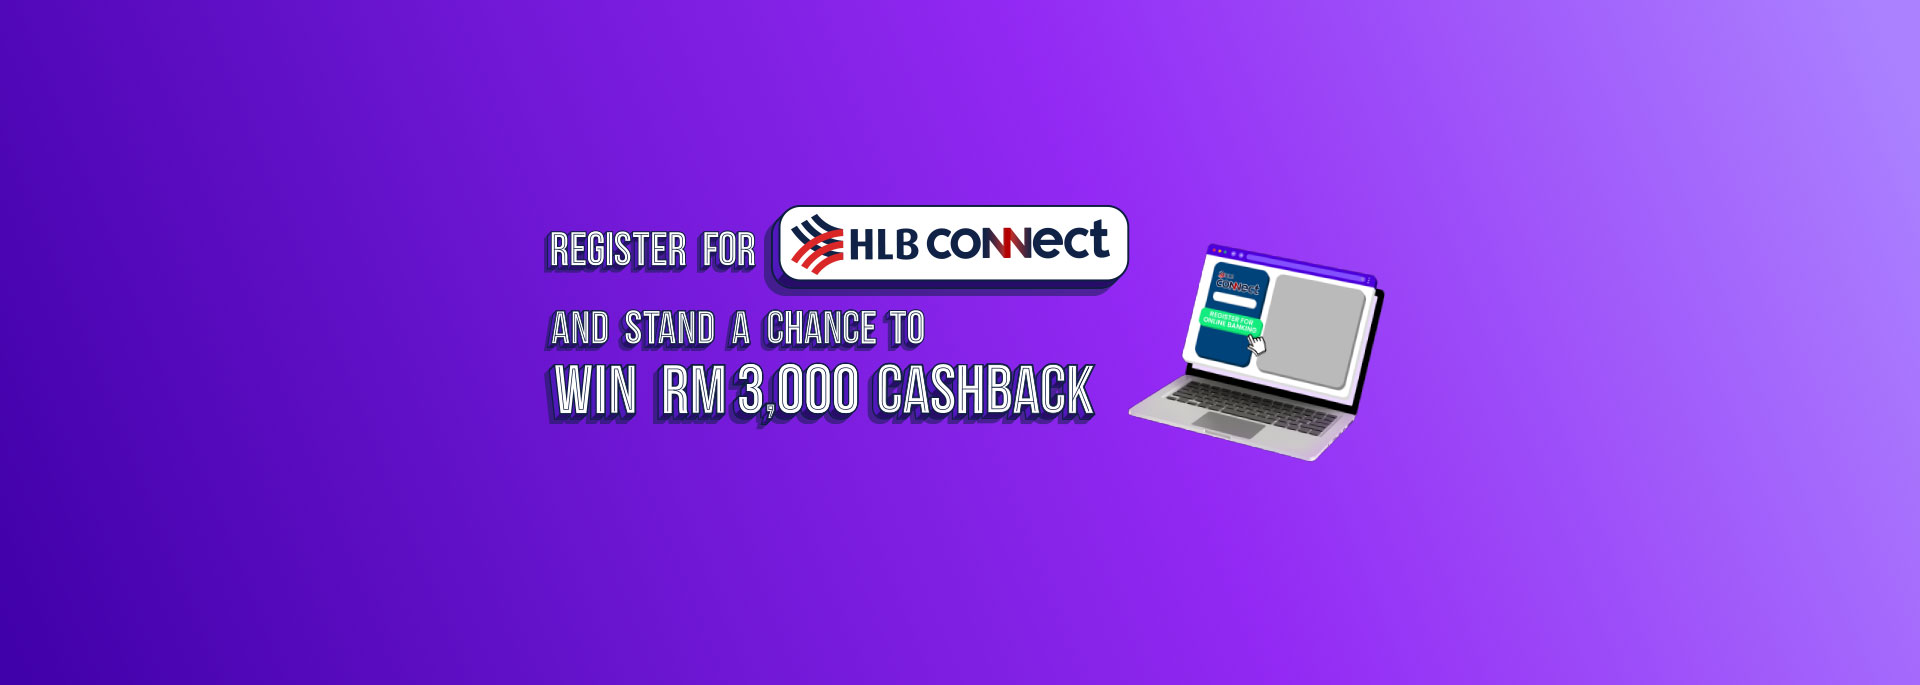 Register for HLB Connect and stand a chance to win RM3,000 cashback